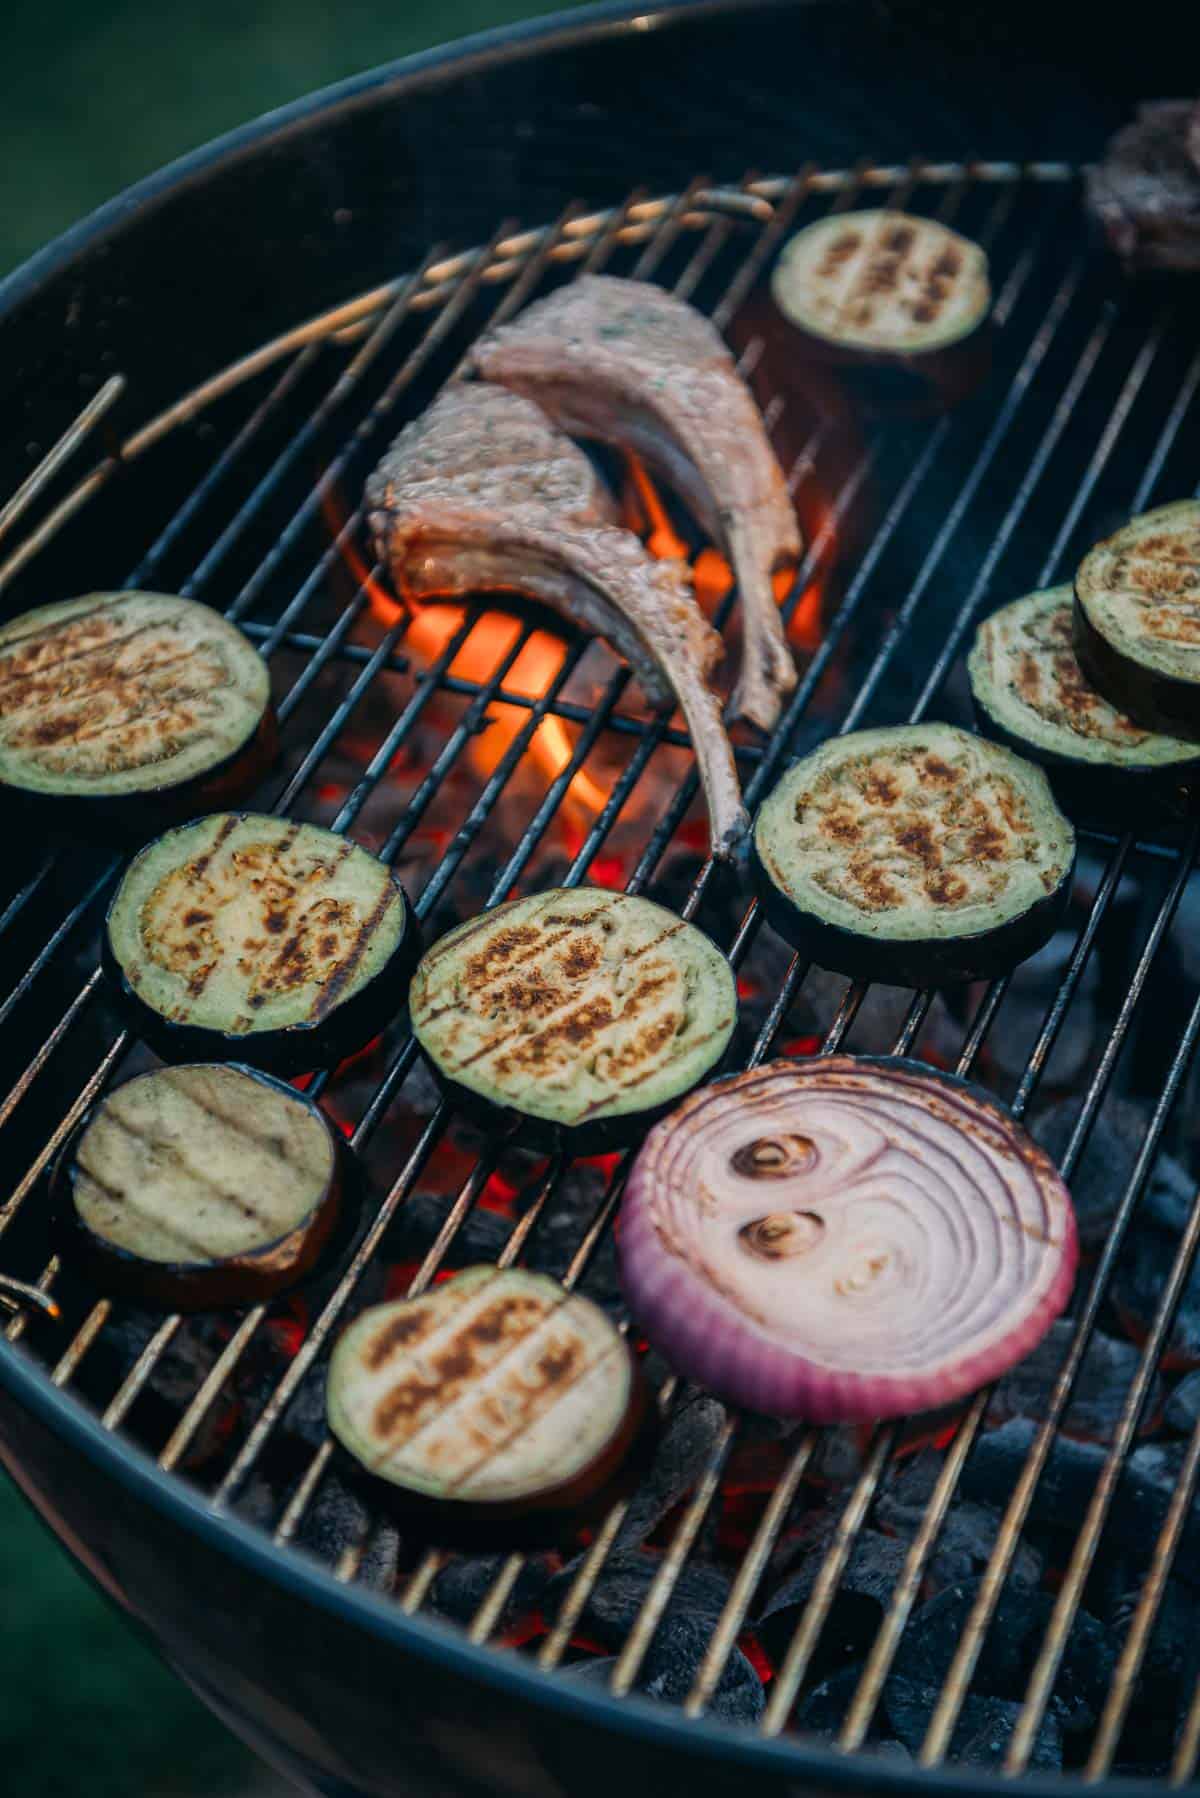 Lamb chops, eggplant and onion on a grill. 